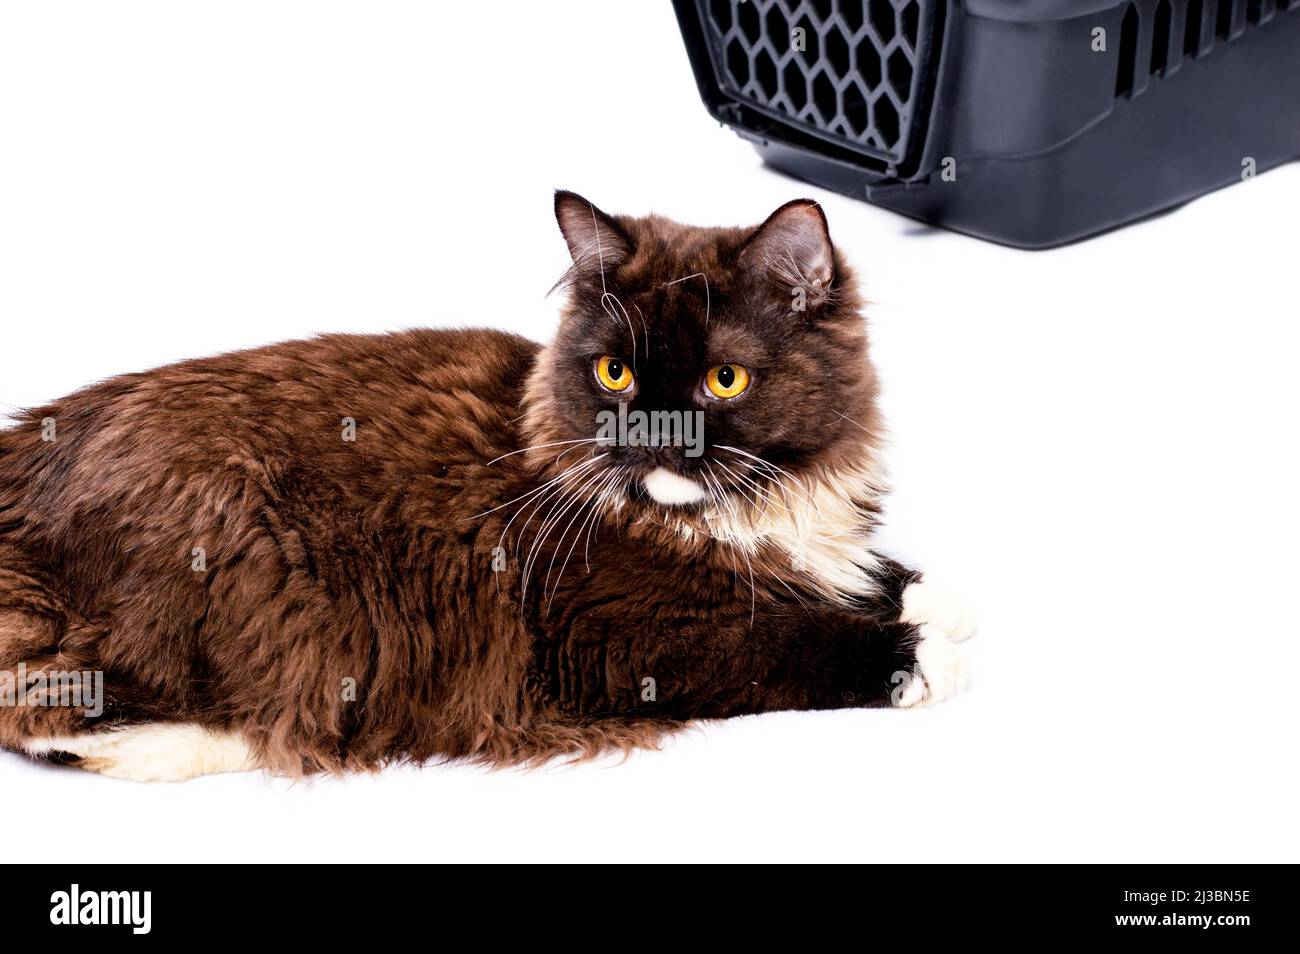 beautiful Scottish Highland brown cat lies near a cat carrier for carrying animals, isolated image, beautiful domestic cats, cats in the house, pets, Stock Photo